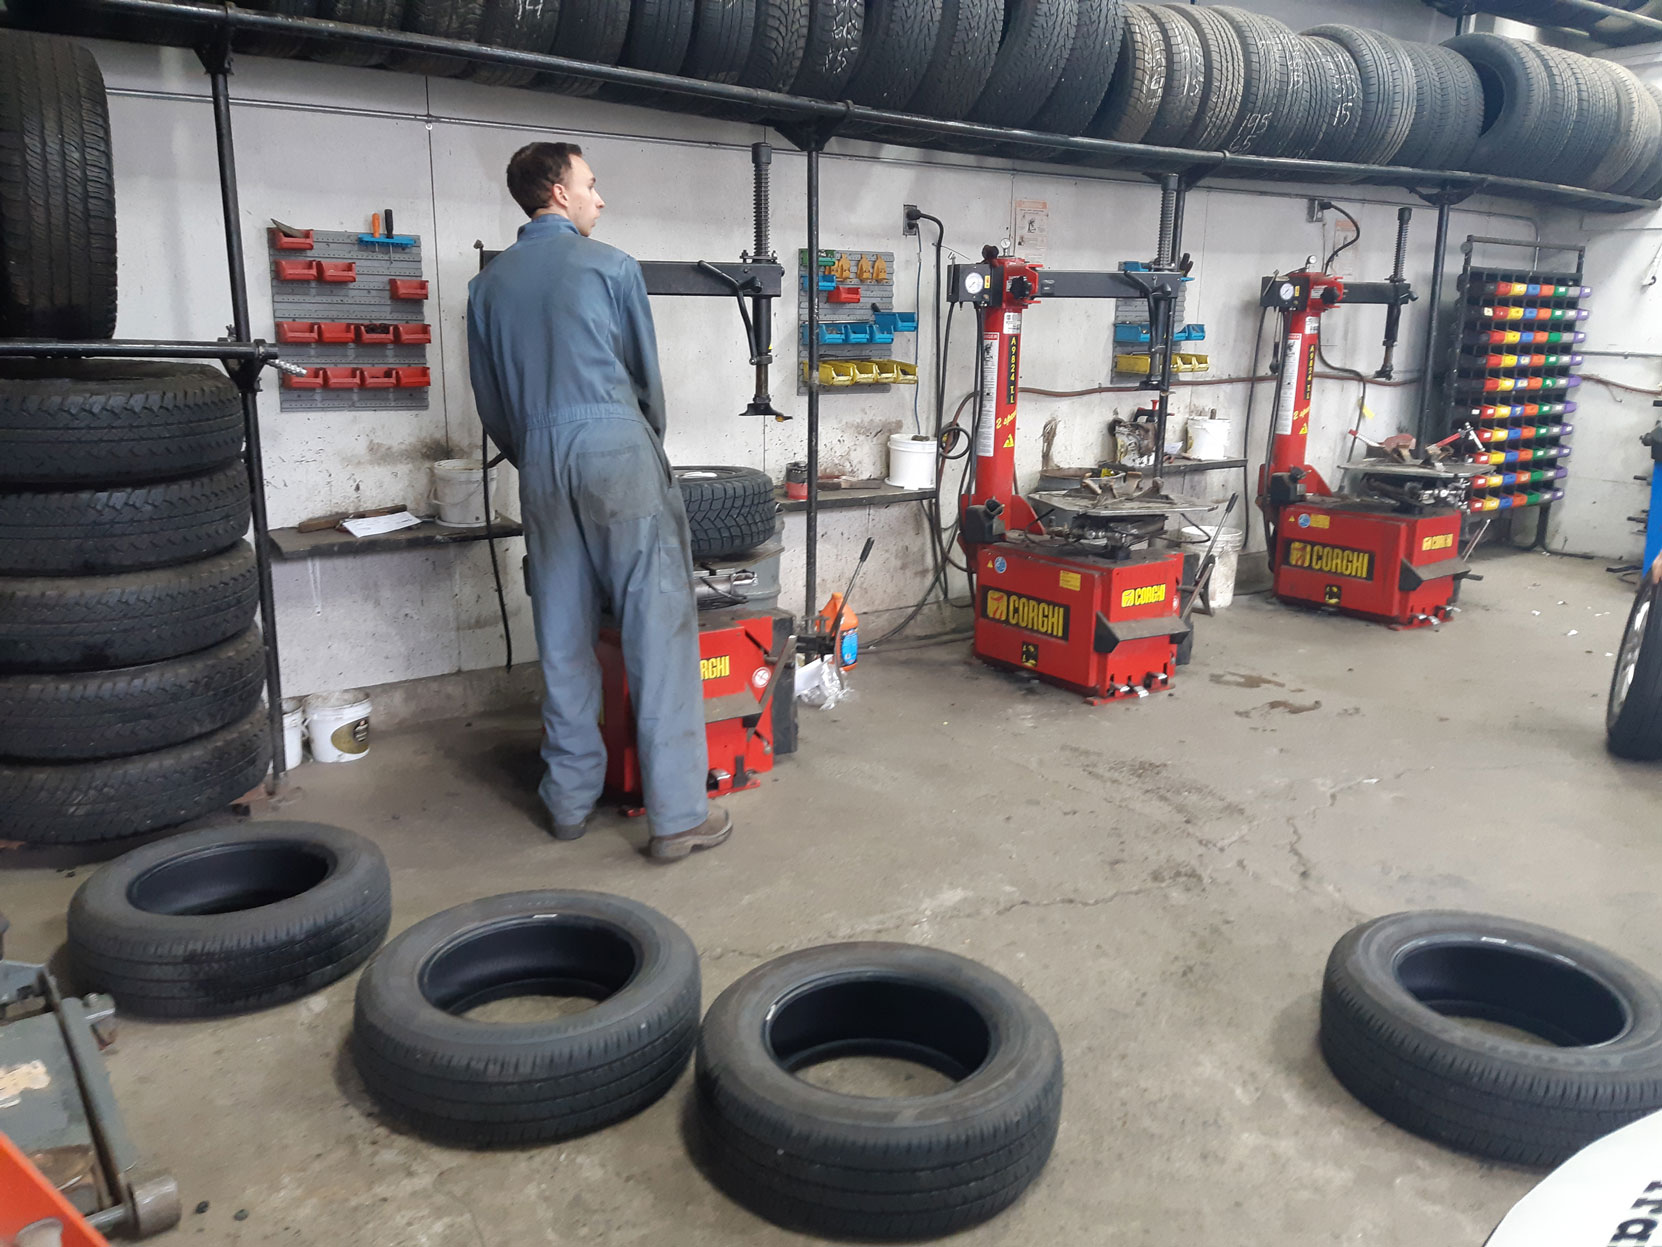 A new set of Michelin winter tires being installed on the rims of our 2020 Prius Prime at Joe's Tire Hospital in Duncan, October 2020 (photo: West Coast Driver Training)